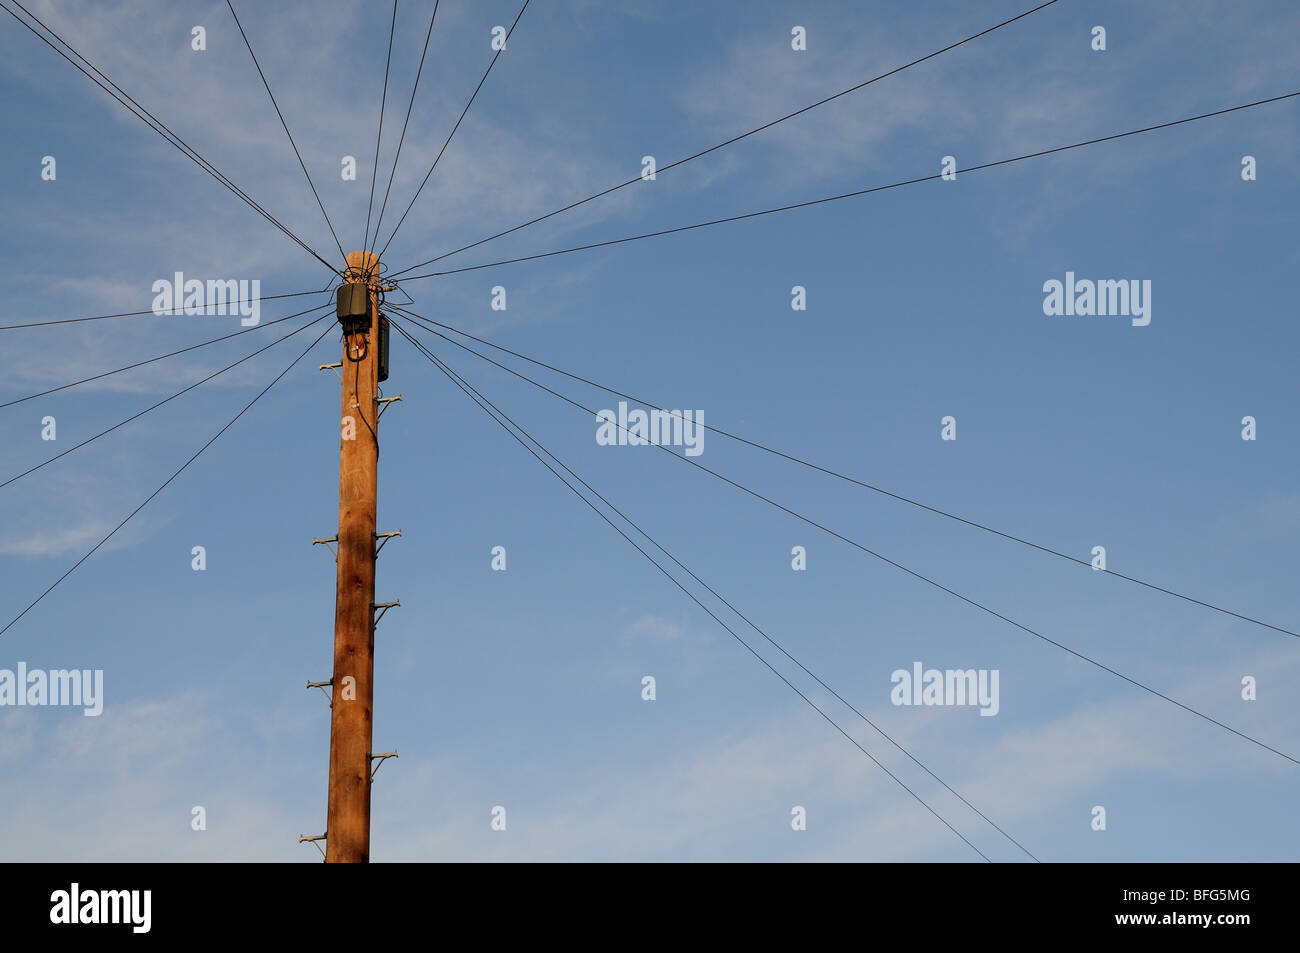 Telephone pole in the UK with lines running out radially Stock Photo